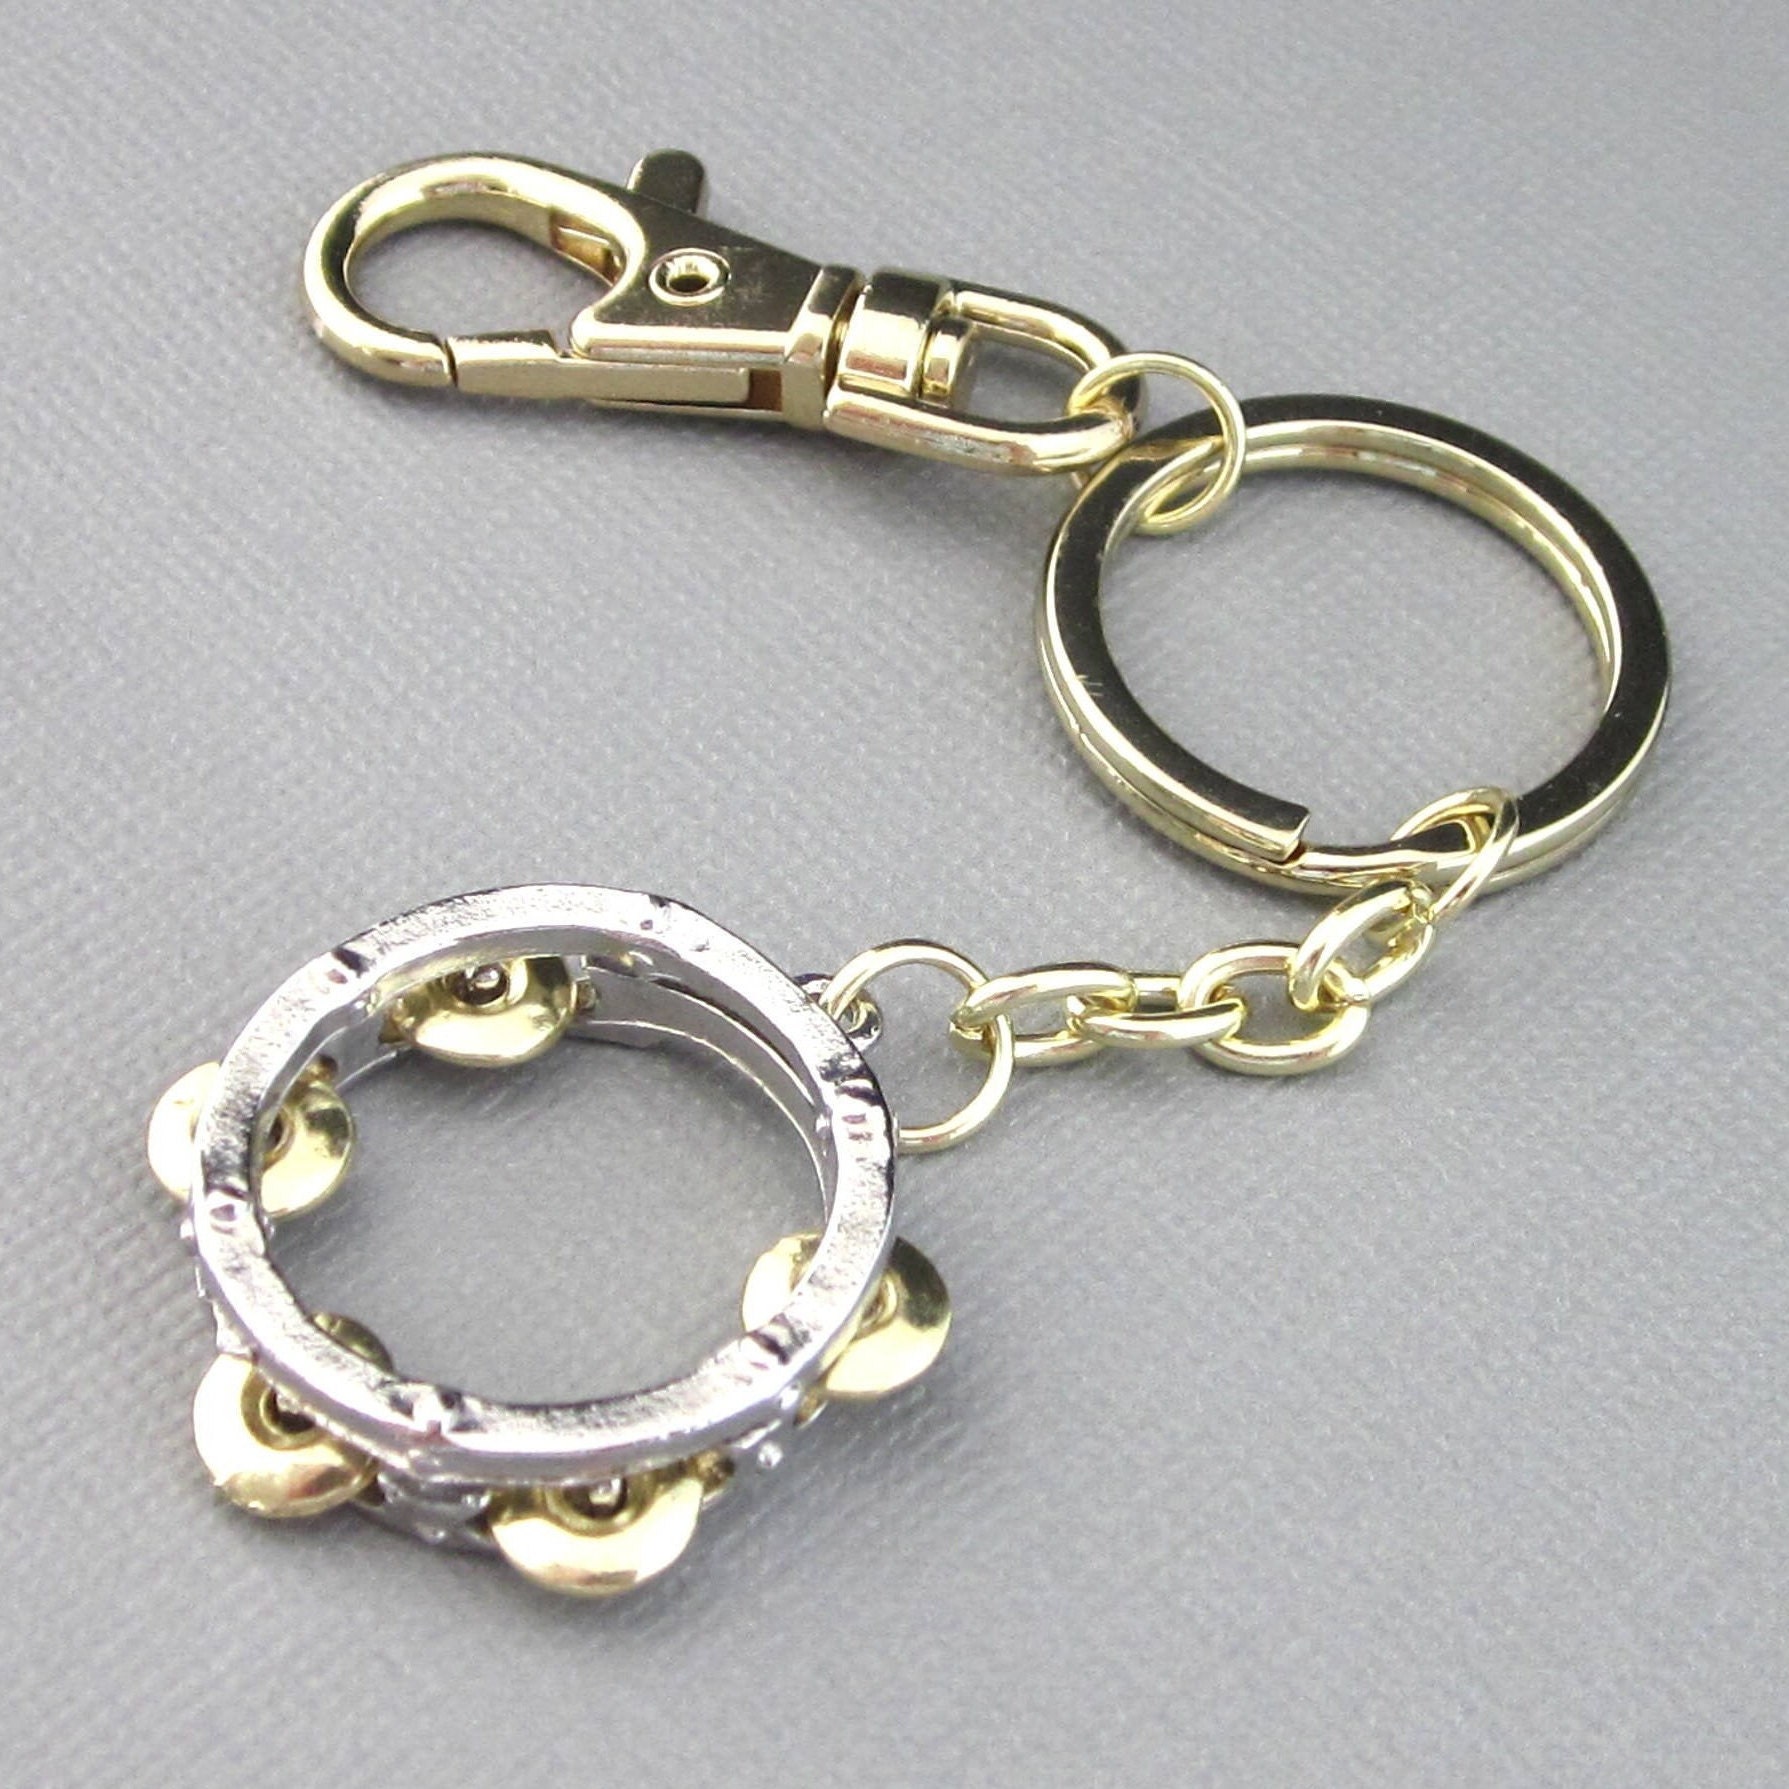 Purse Replacement Chains with Clasp Cenoz 2PCS DIY Heavy Chunky